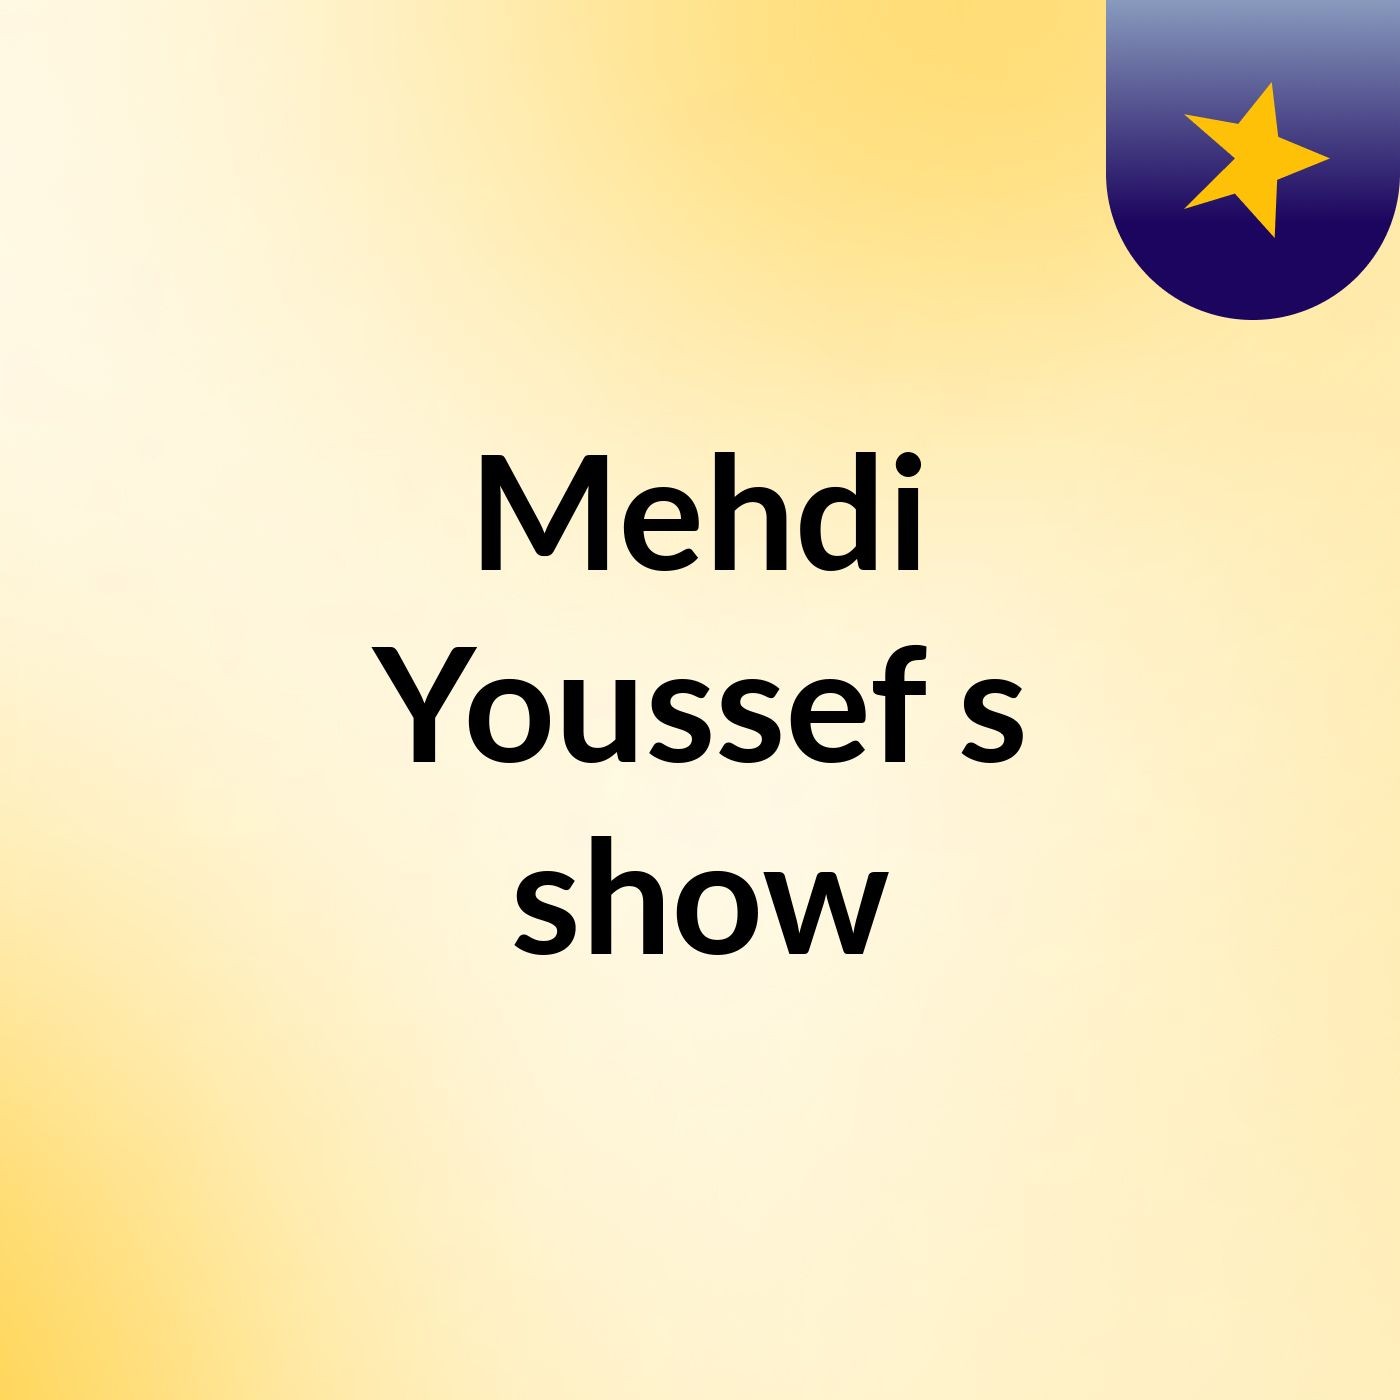 Mehdi Youssef's show